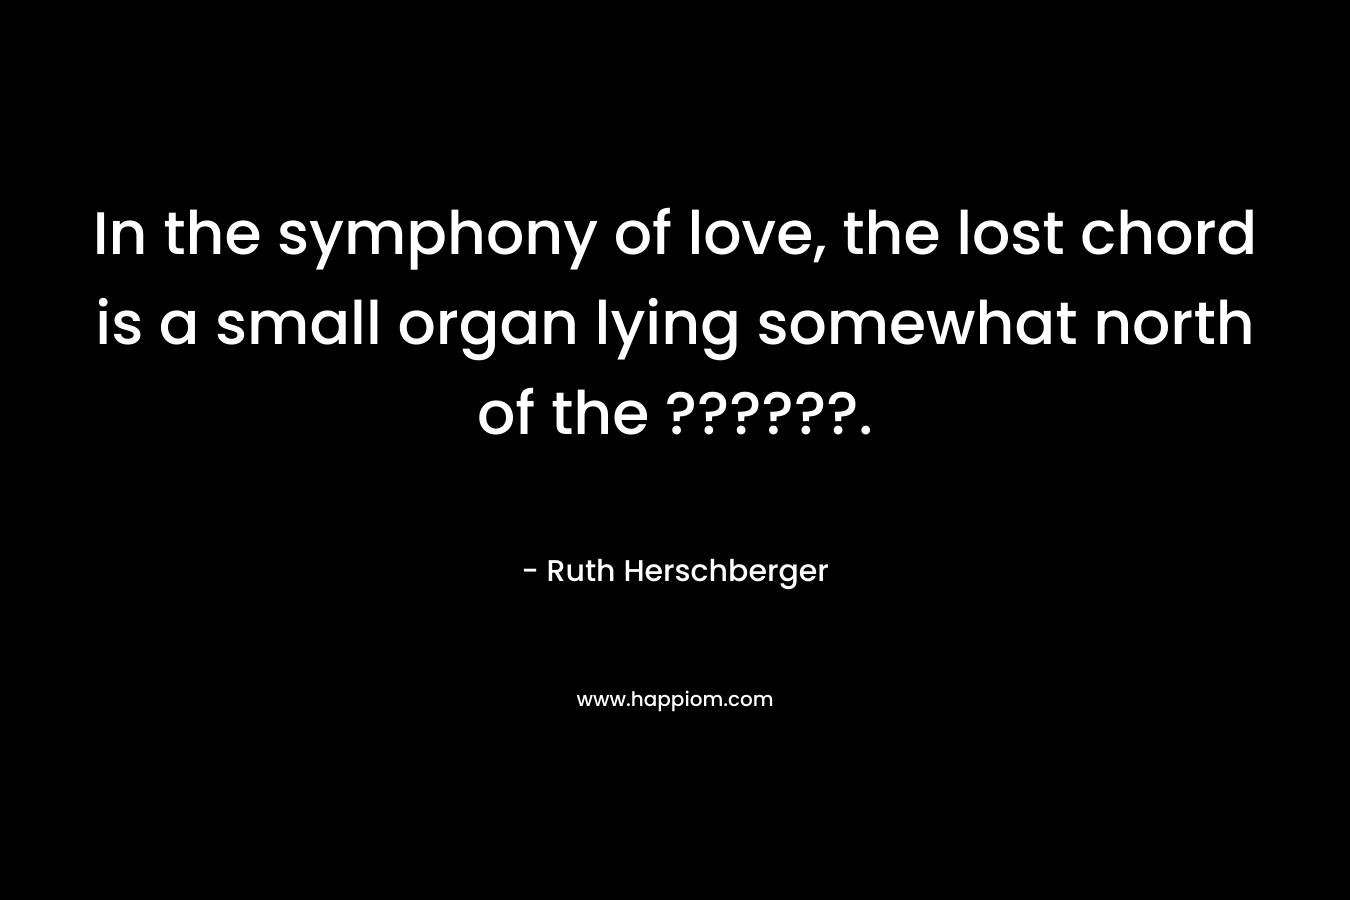 In the symphony of love, the lost chord is a small organ lying somewhat north of the ??????.